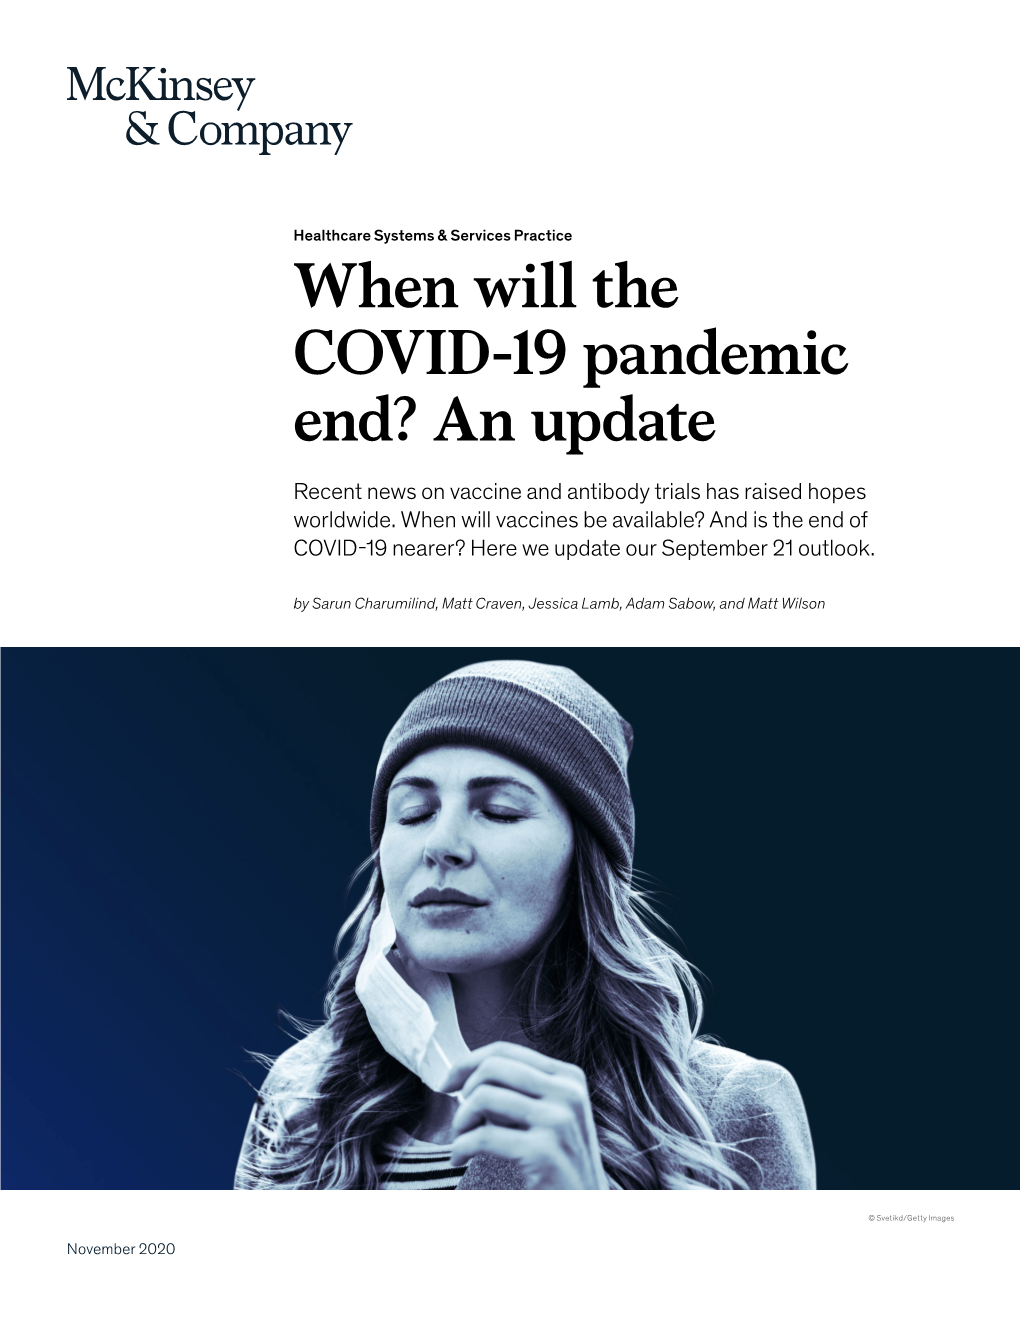 When Will the COVID-19 Pandemic End? an Update